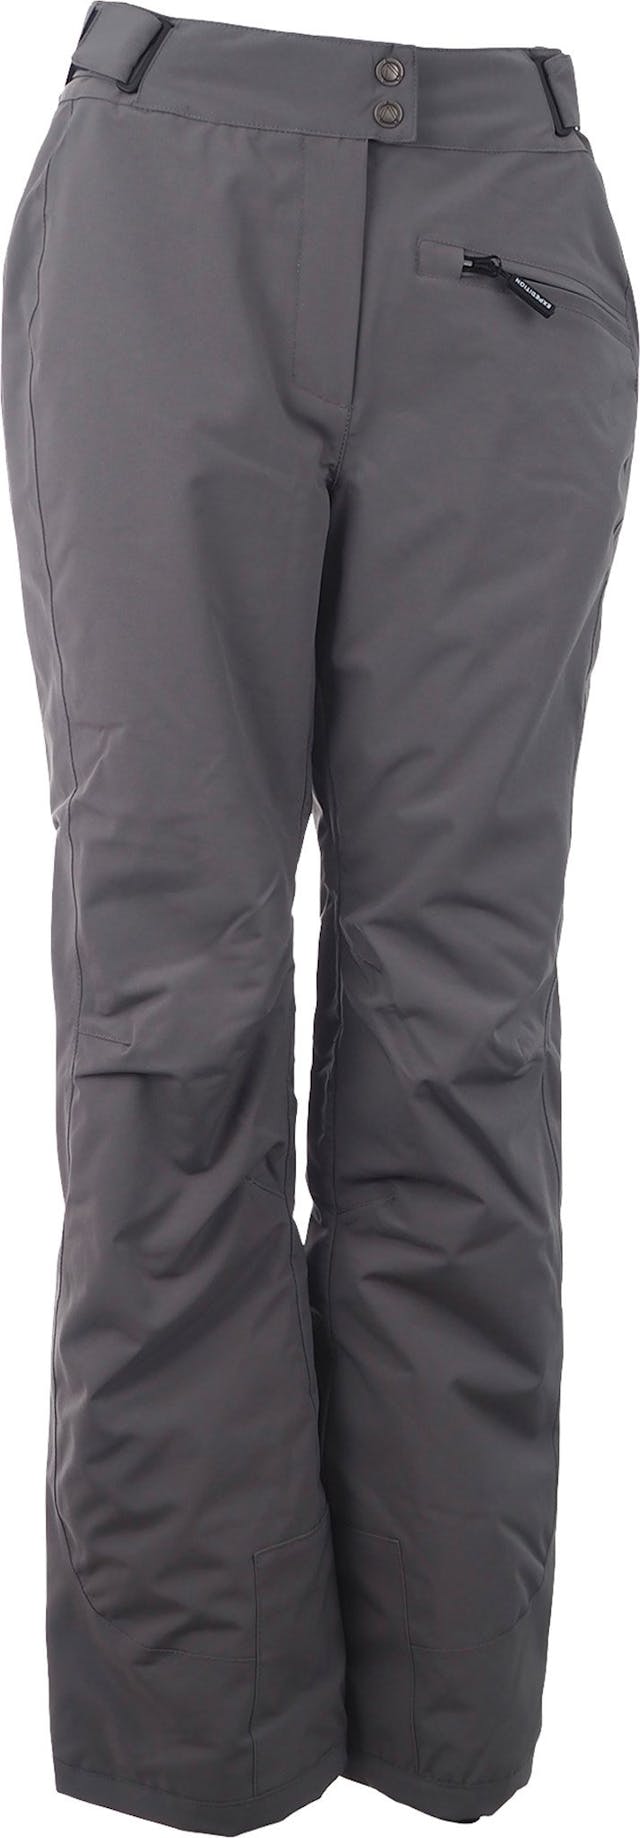 Product image for Element Avalanche Pants - Women's